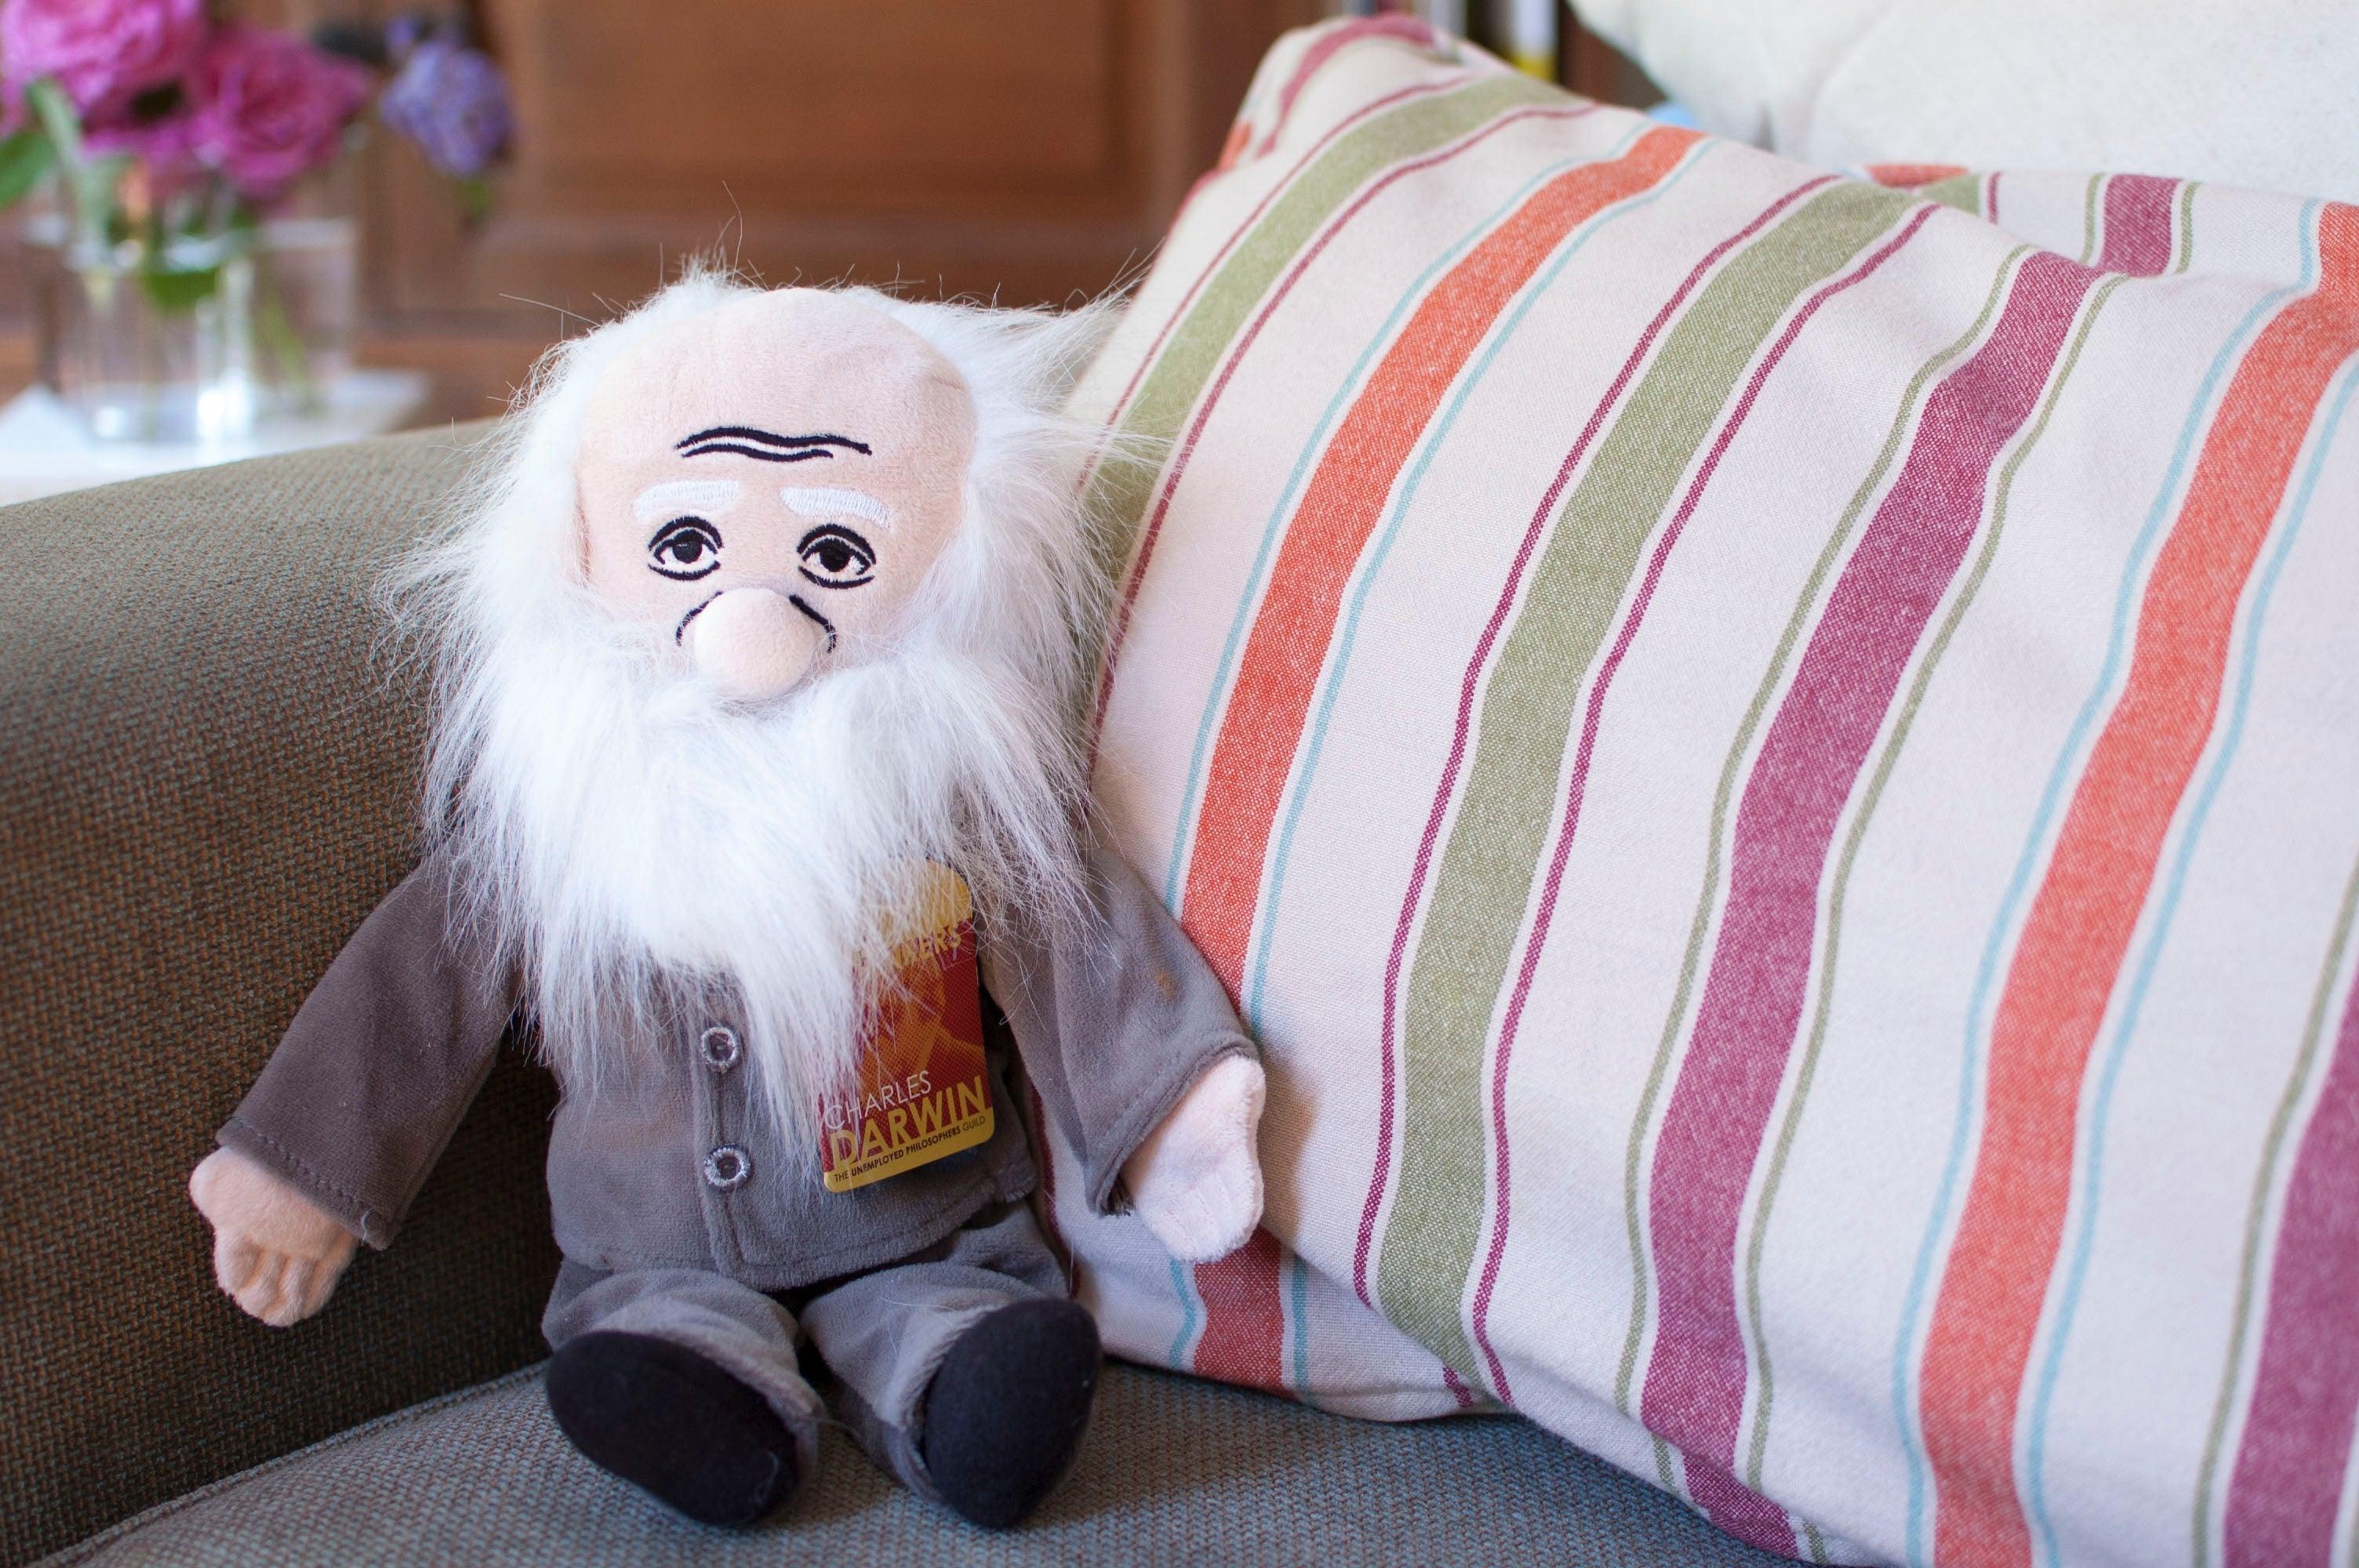 Product photo of Charles Darwin Plush Doll, a novelty gift manufactured by The Unemployed Philosophers Guild.